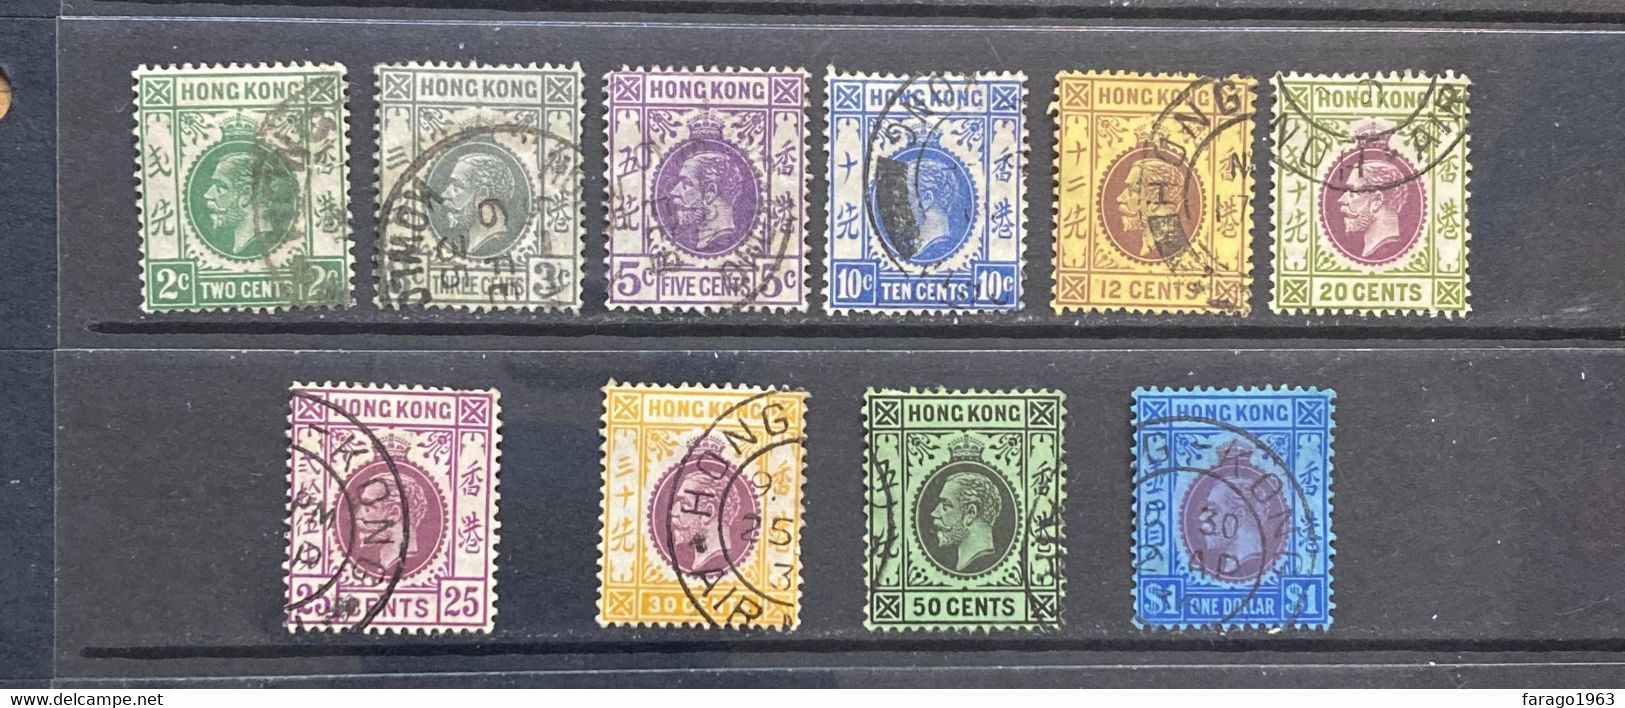 1921 Hong Kong KGV  2c//$1  Ten (10) Different Stamps VF CDS Used - Used Stamps